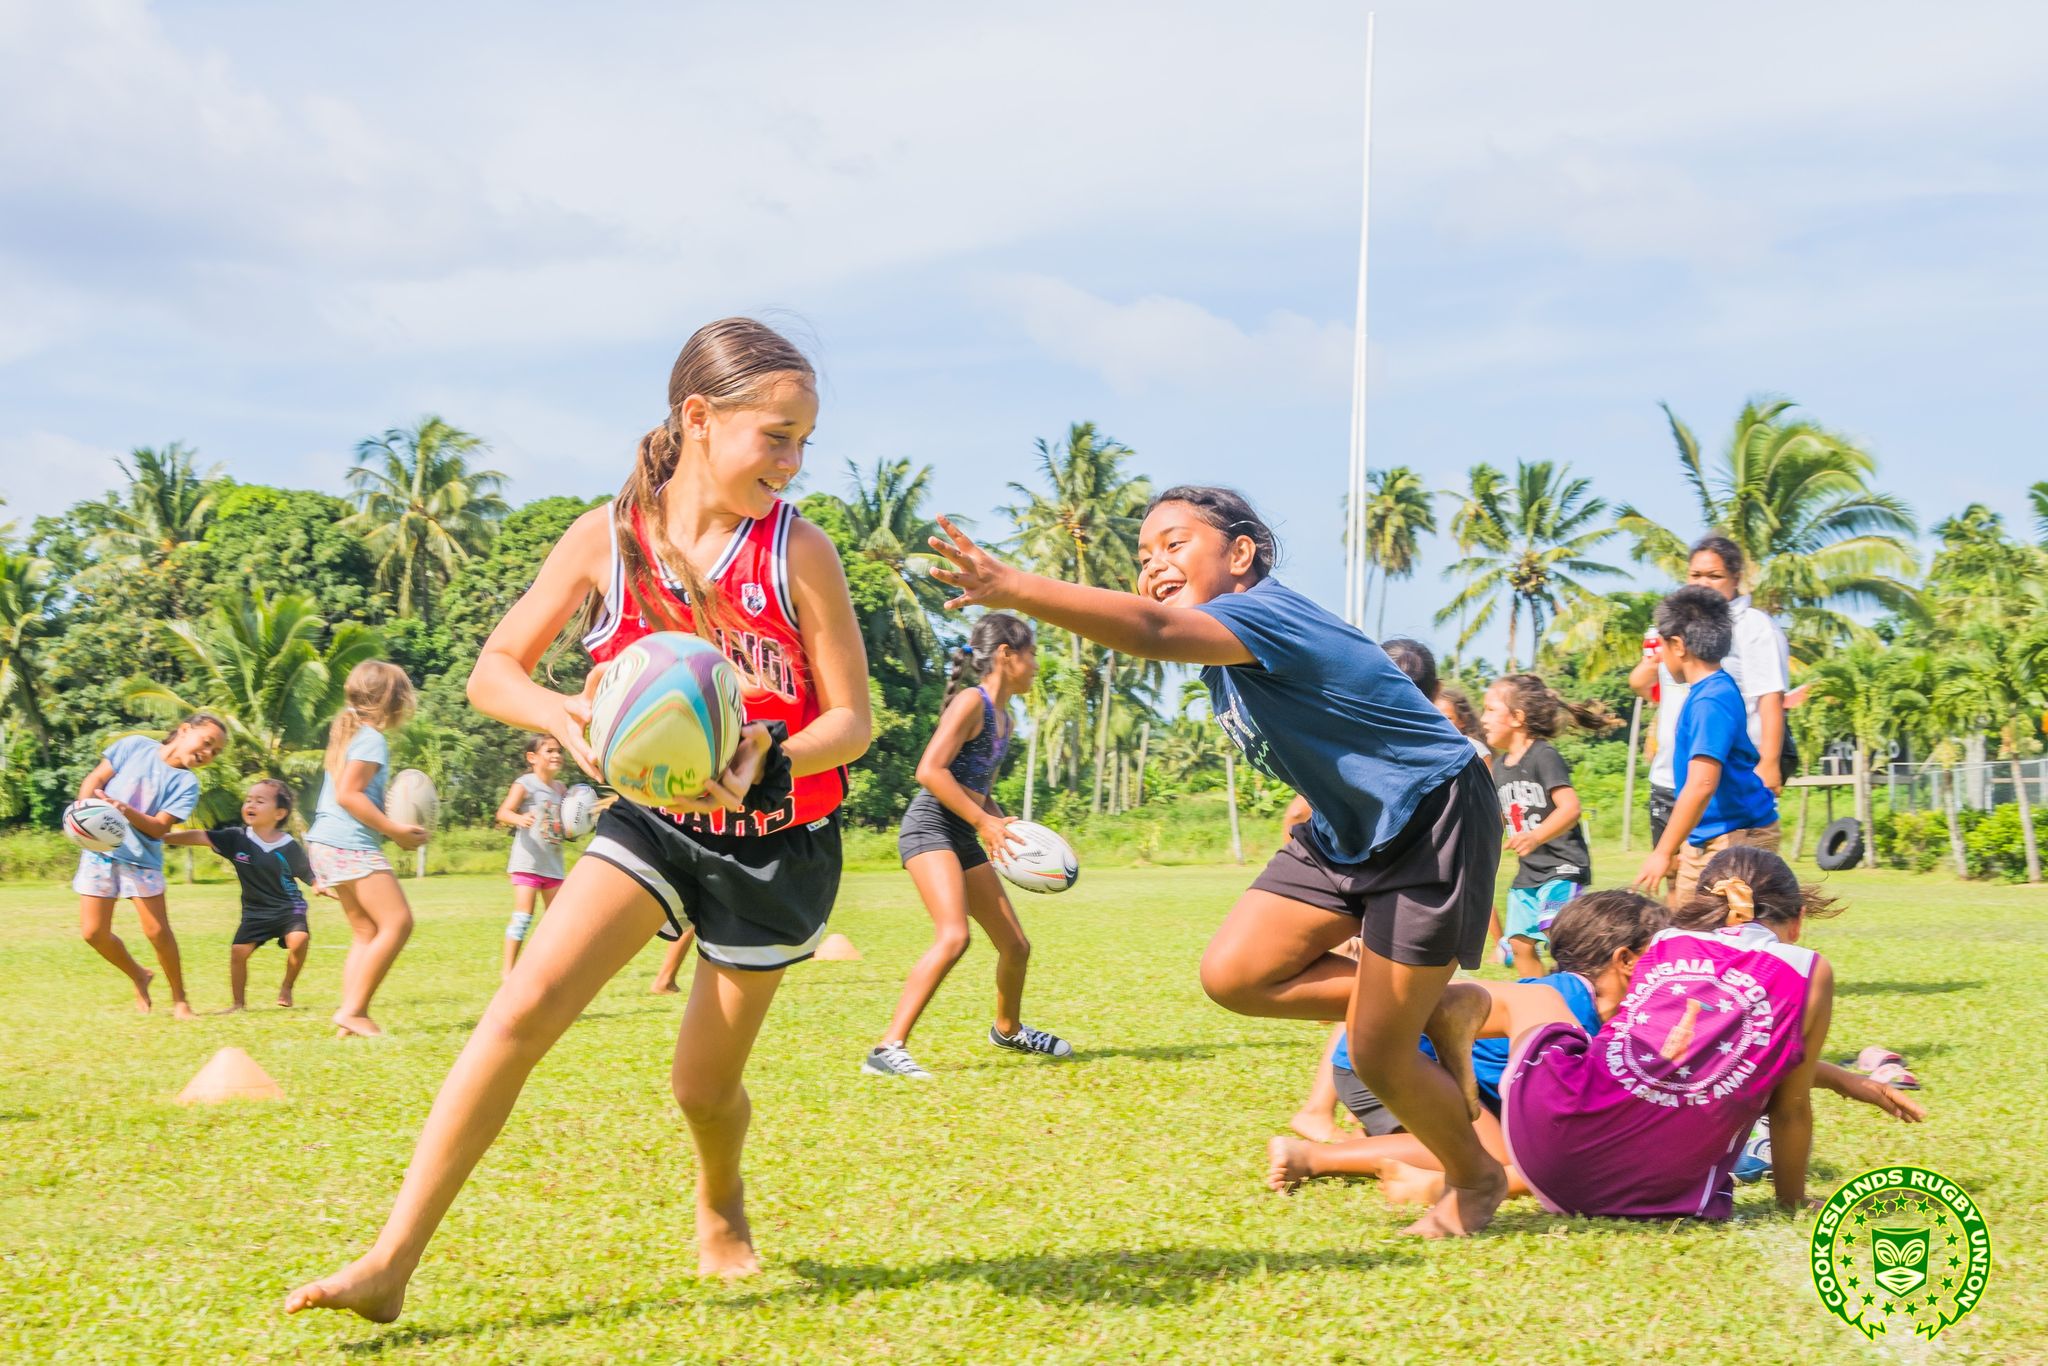 ‘She’s a Ruckstar’ rugby clinic draws good turnout on day one